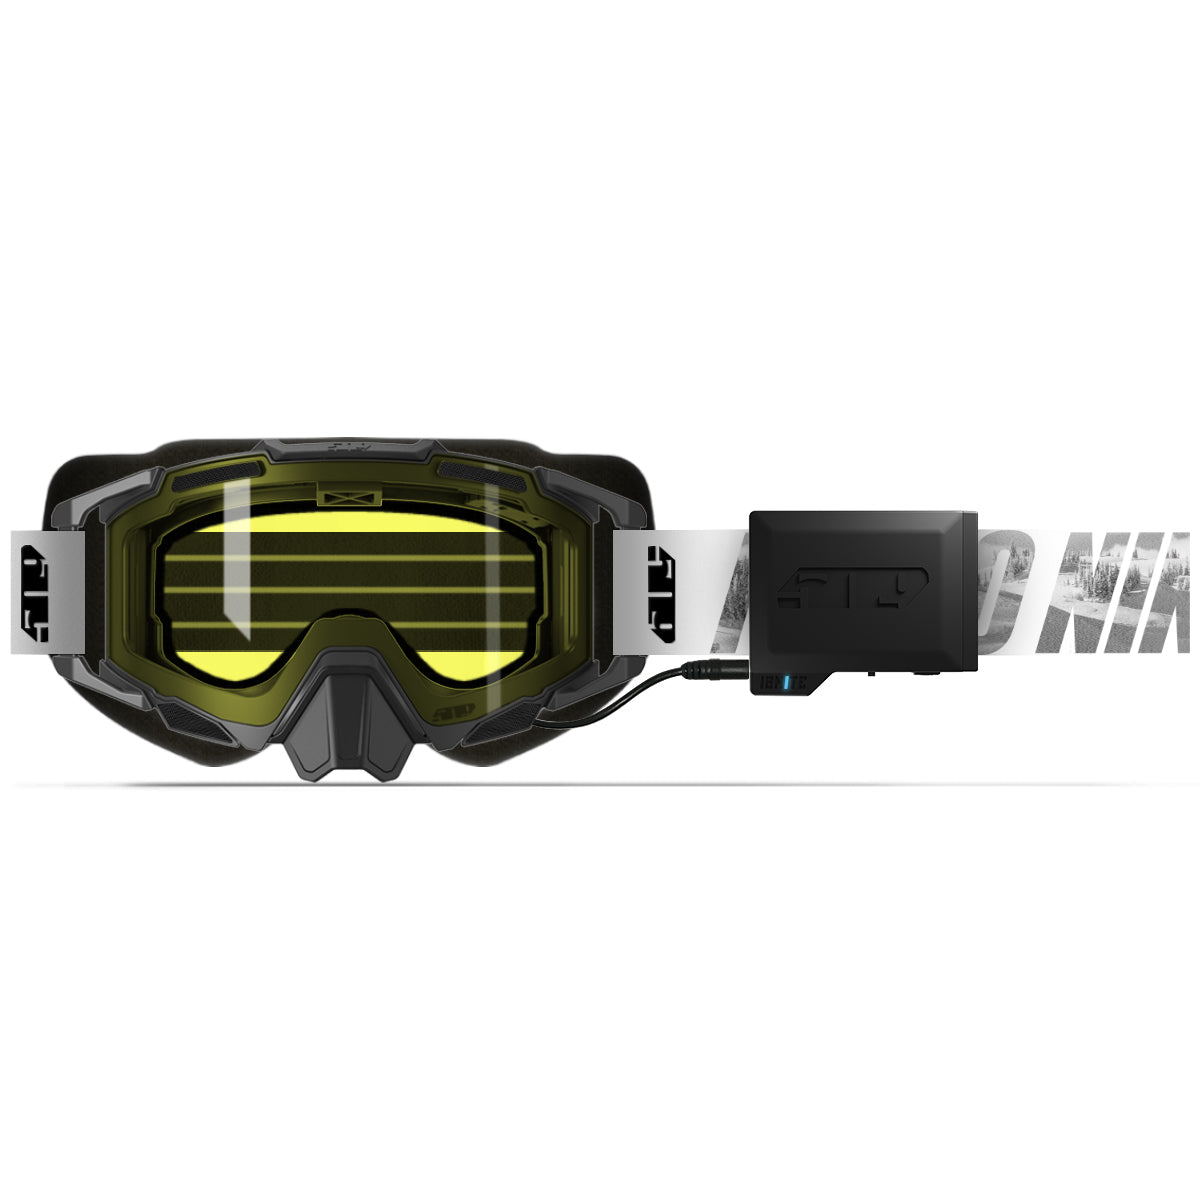 Sinister XL7 Ignite S1 Goggle - Whiteout